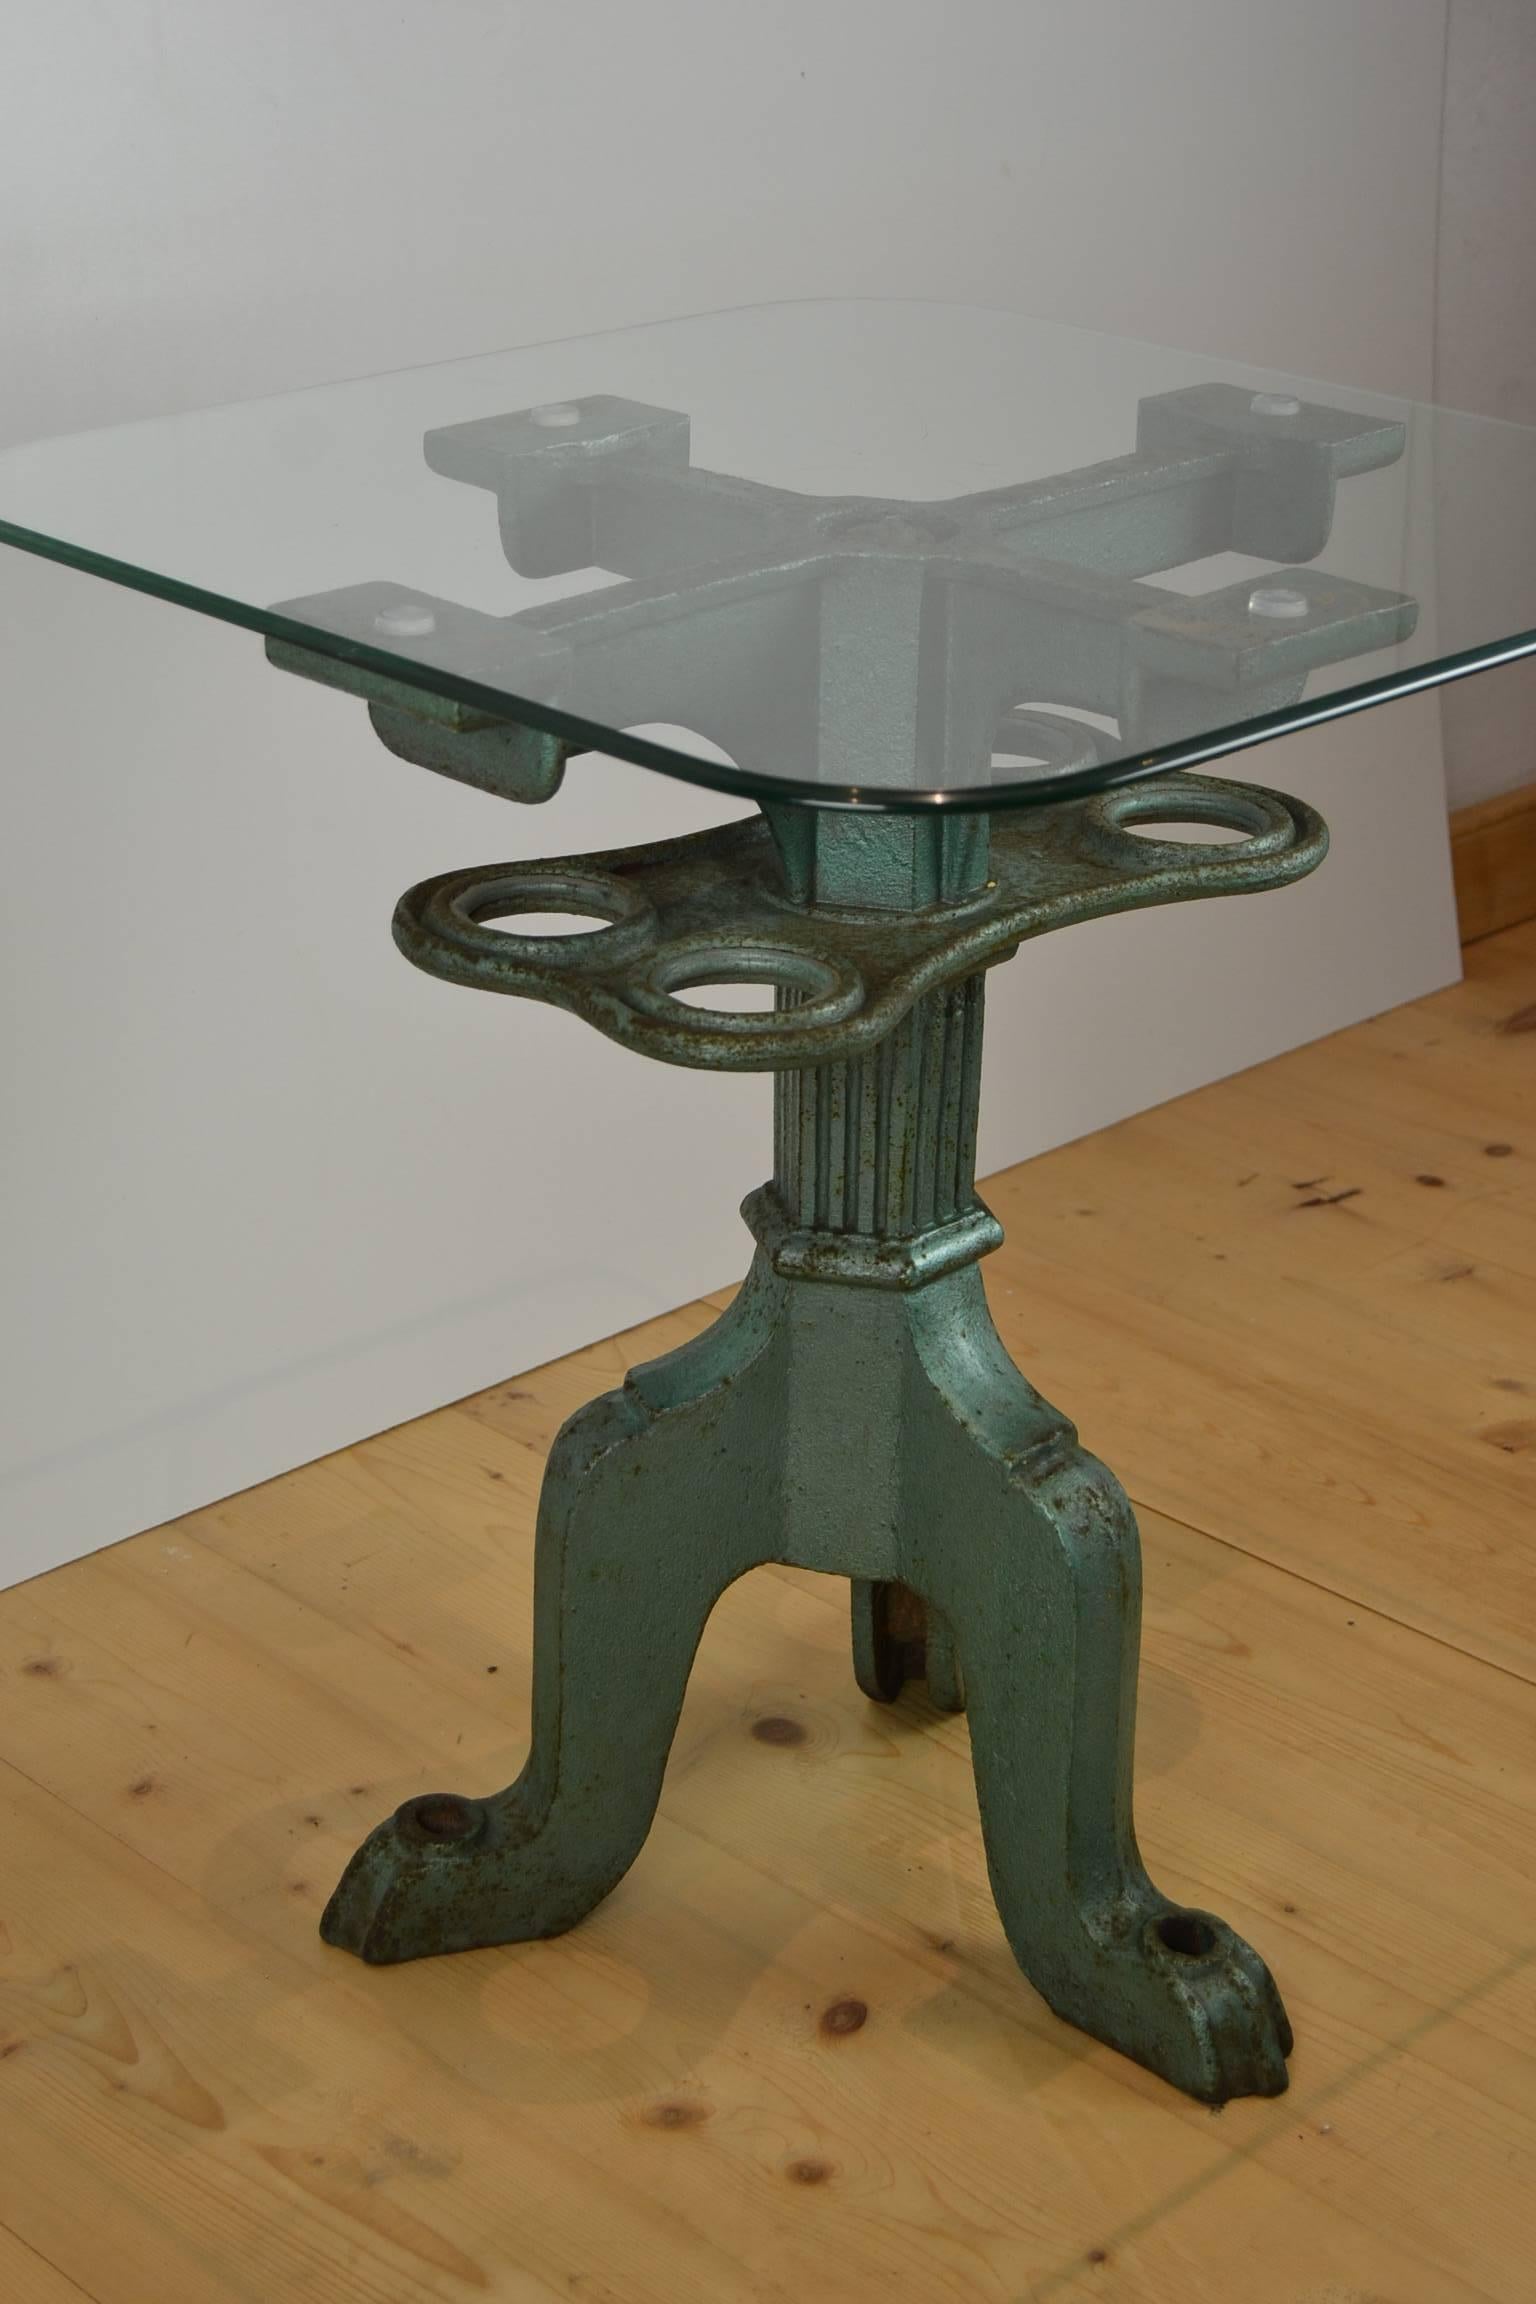 Side table, antique Industrial base, circa 1930 with square vintage glass top.
The cast iron base has a beautiful shape and has his original green colored hammering paint with a great old patina.
The glass table top is used so little